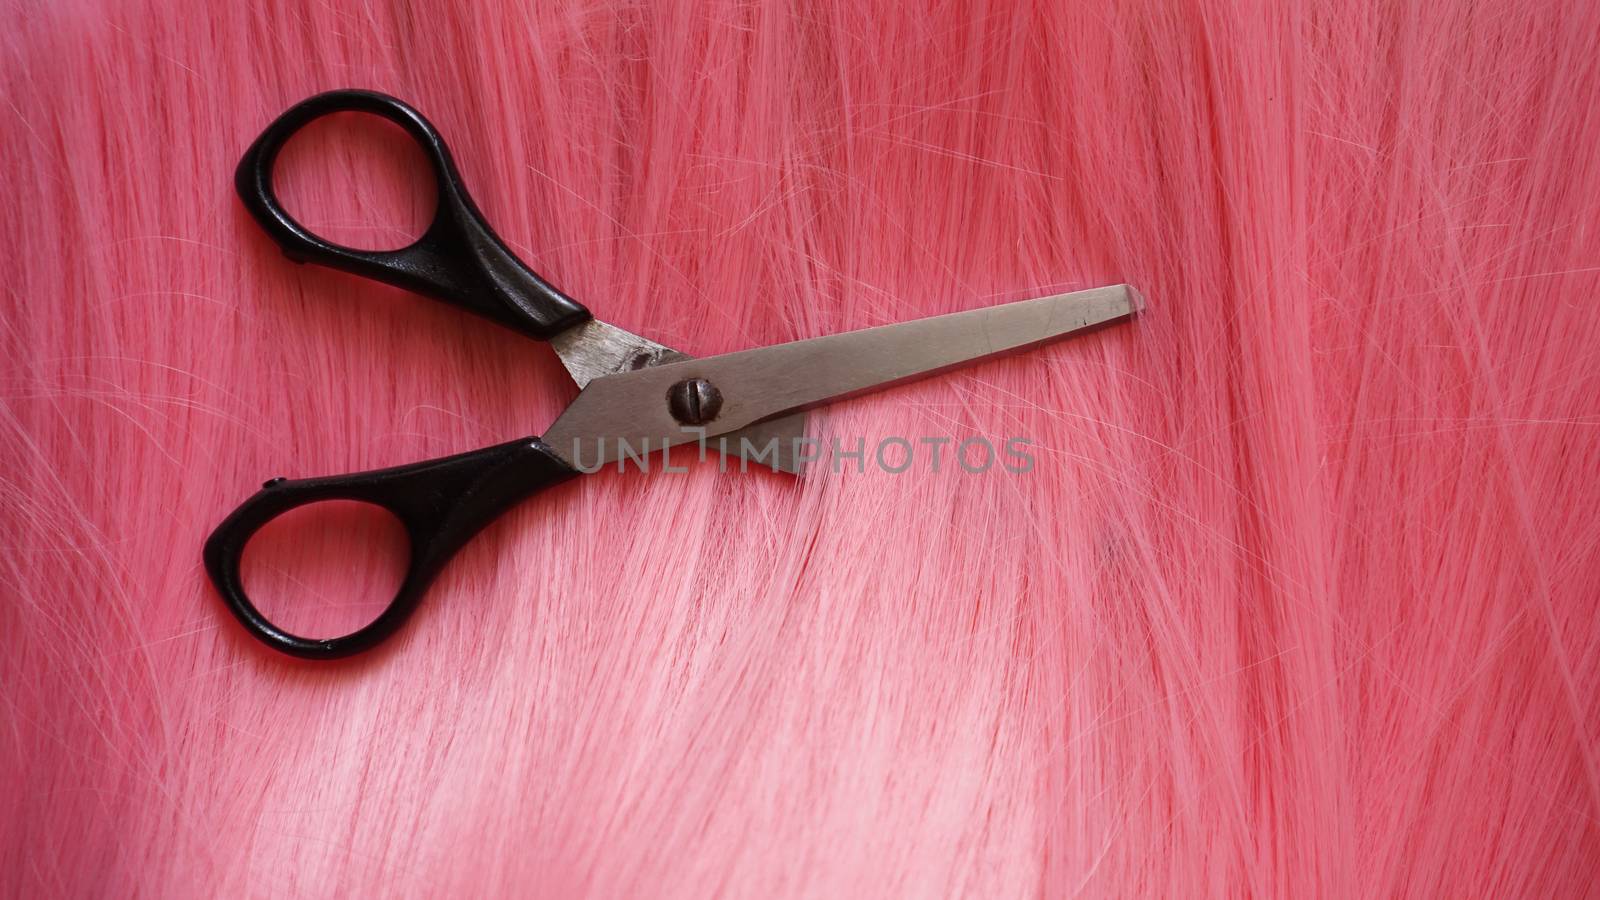 Wig and scissors - pink wig - hairstyle background by natali_brill